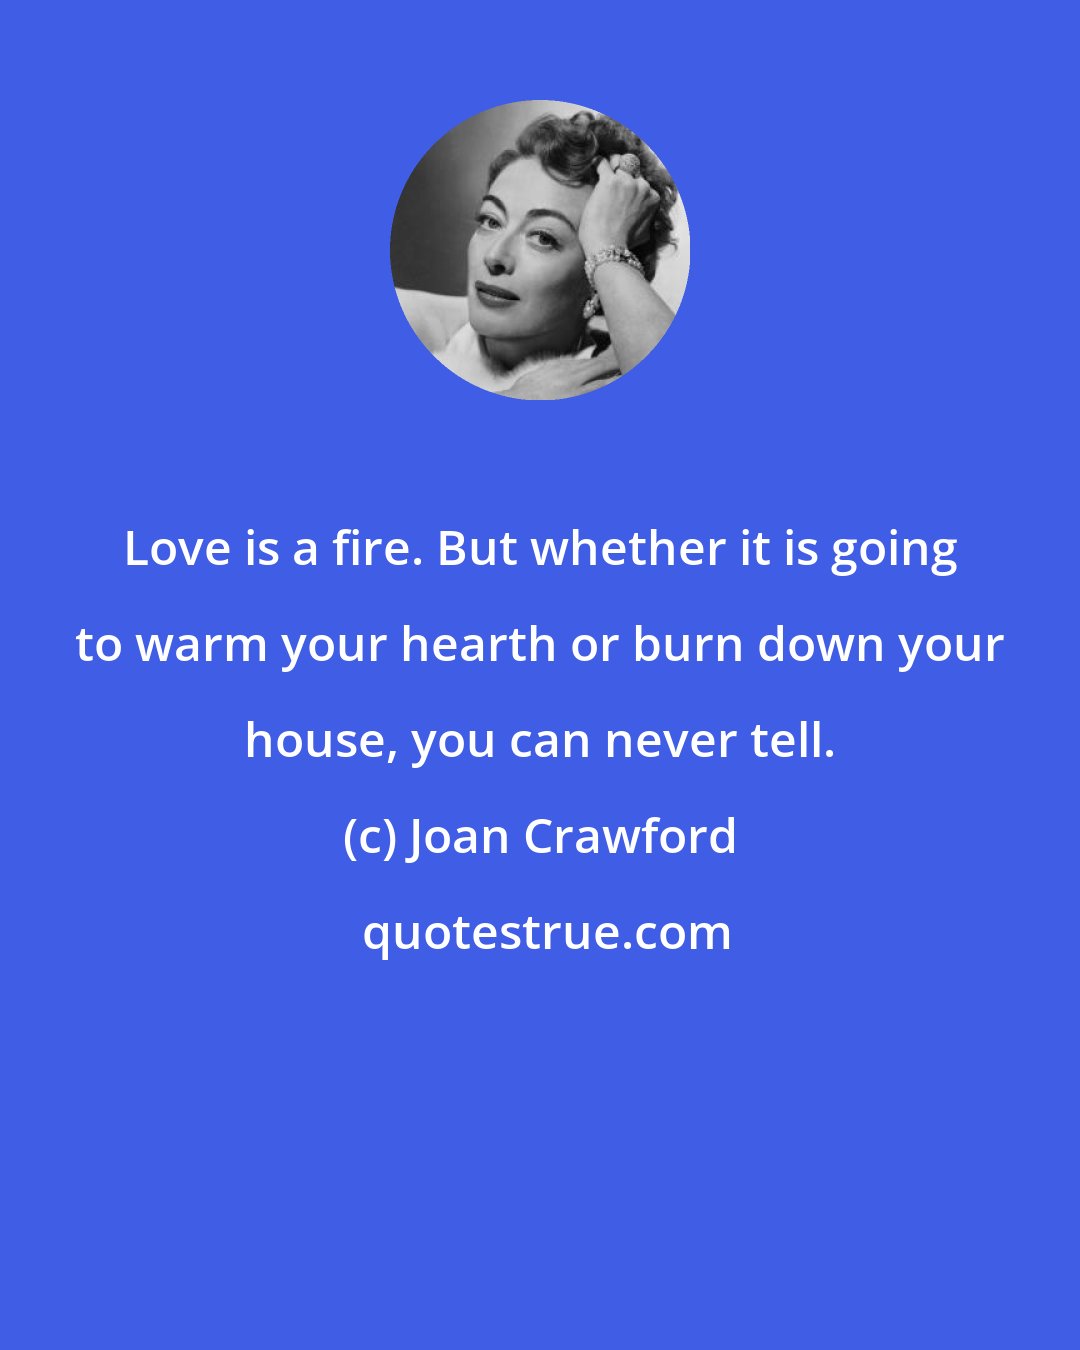 Joan Crawford: Love is a fire. But whether it is going to warm your hearth or burn down your house, you can never tell.